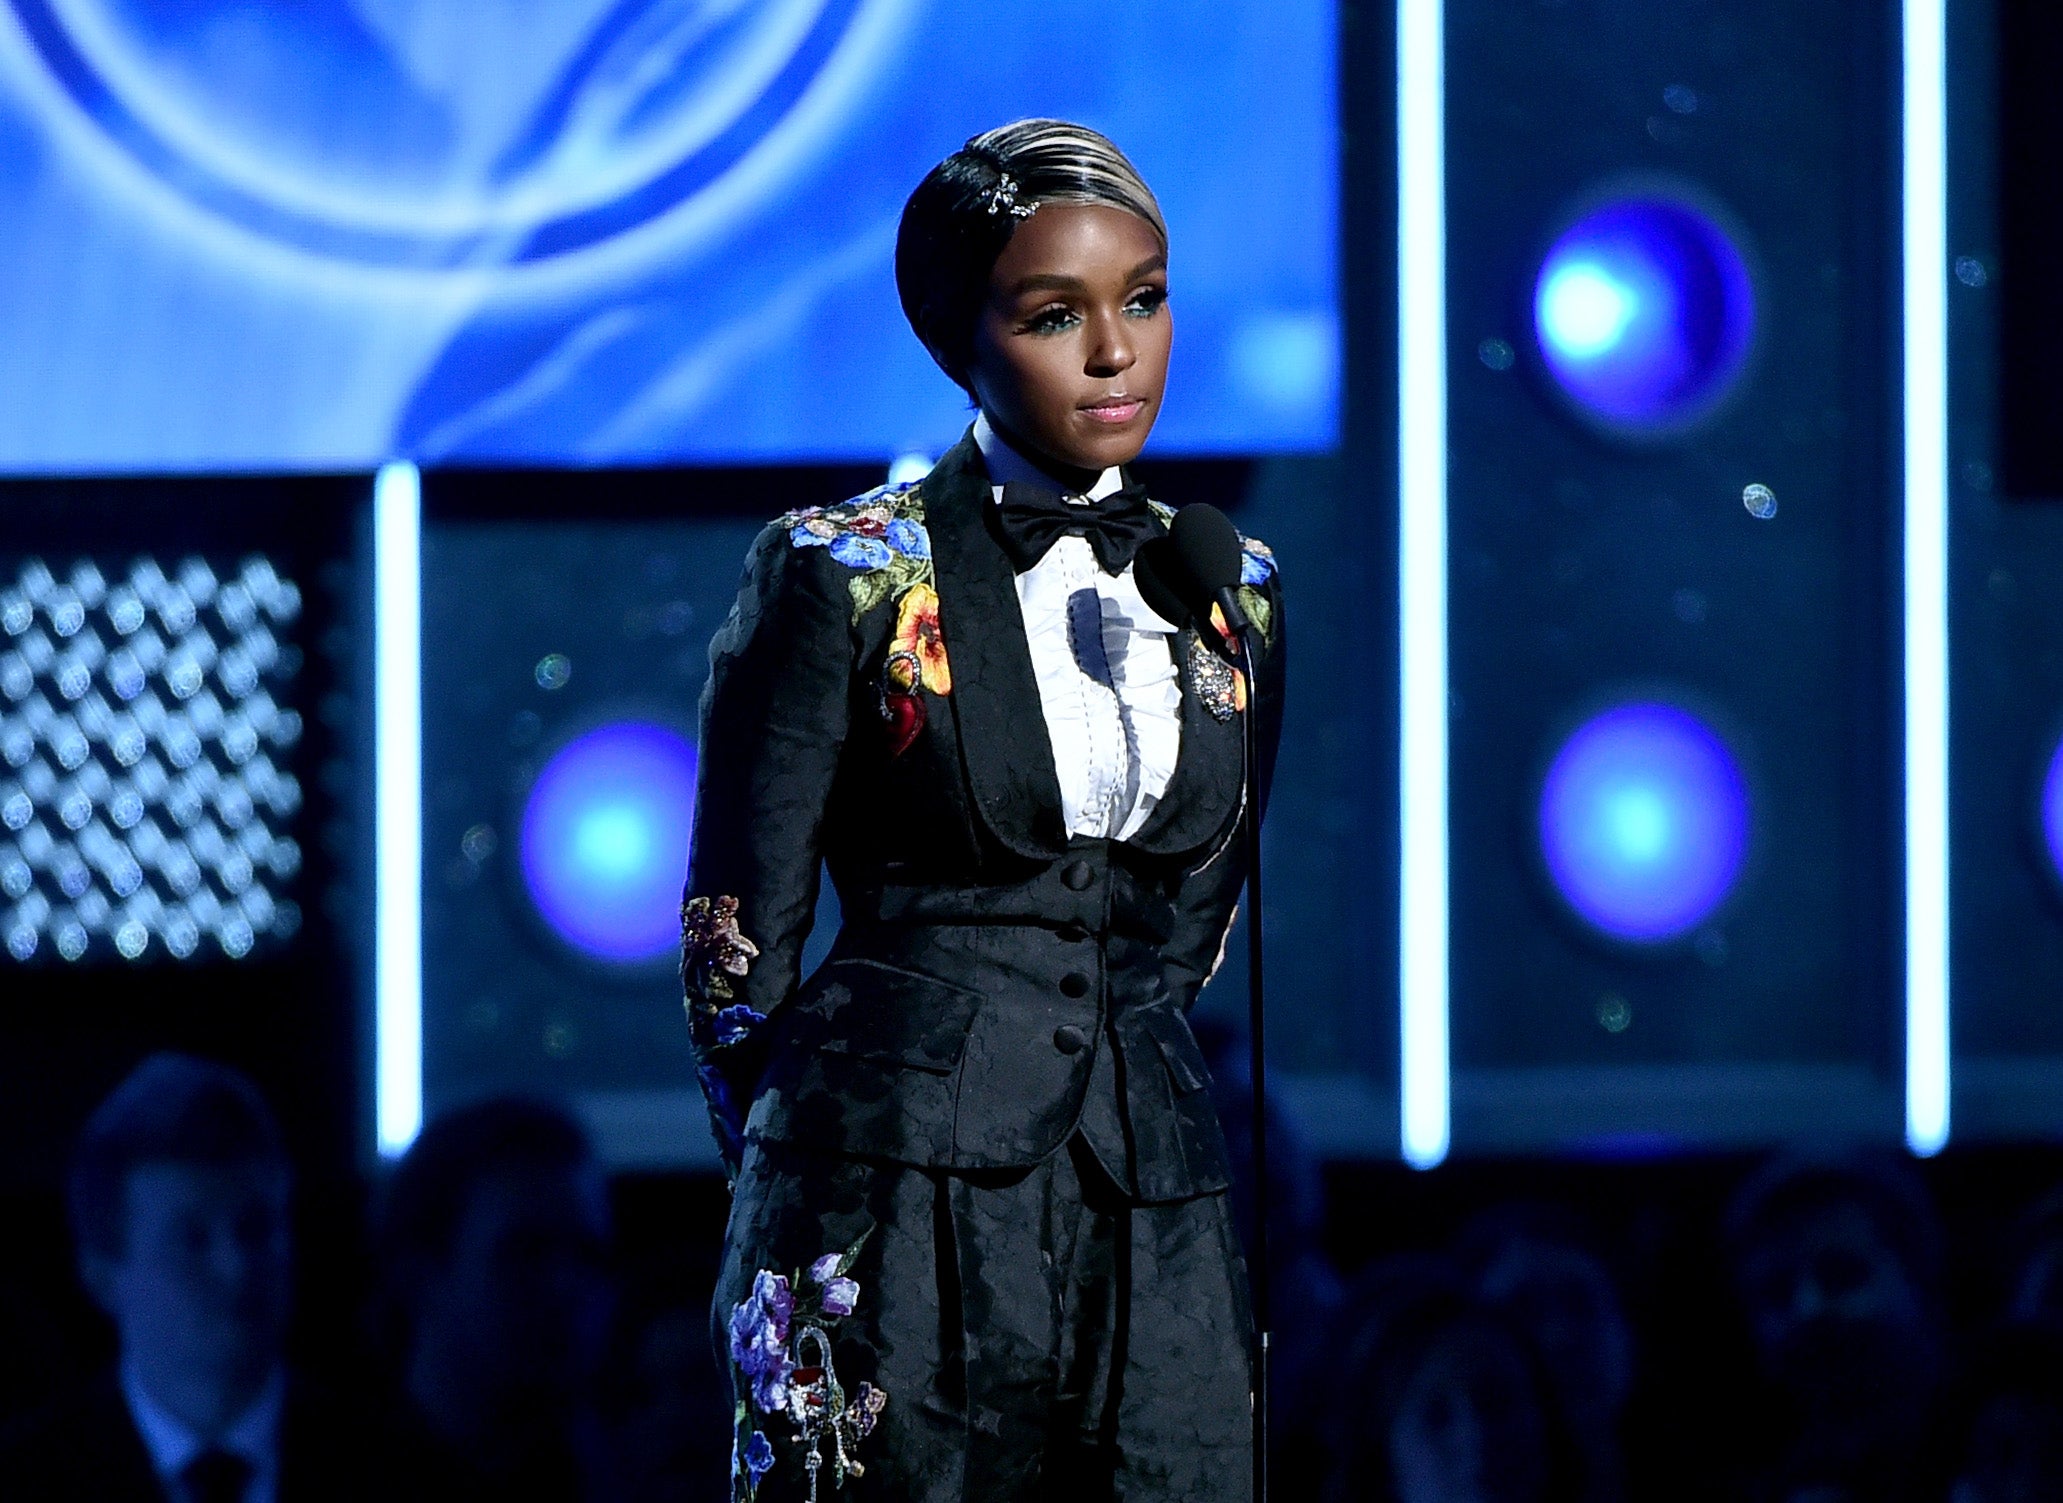 GRAMMYs 2018: Janelle Monáe Declares 'Time's Up' On The Abuse Of Power In The Music Industry
